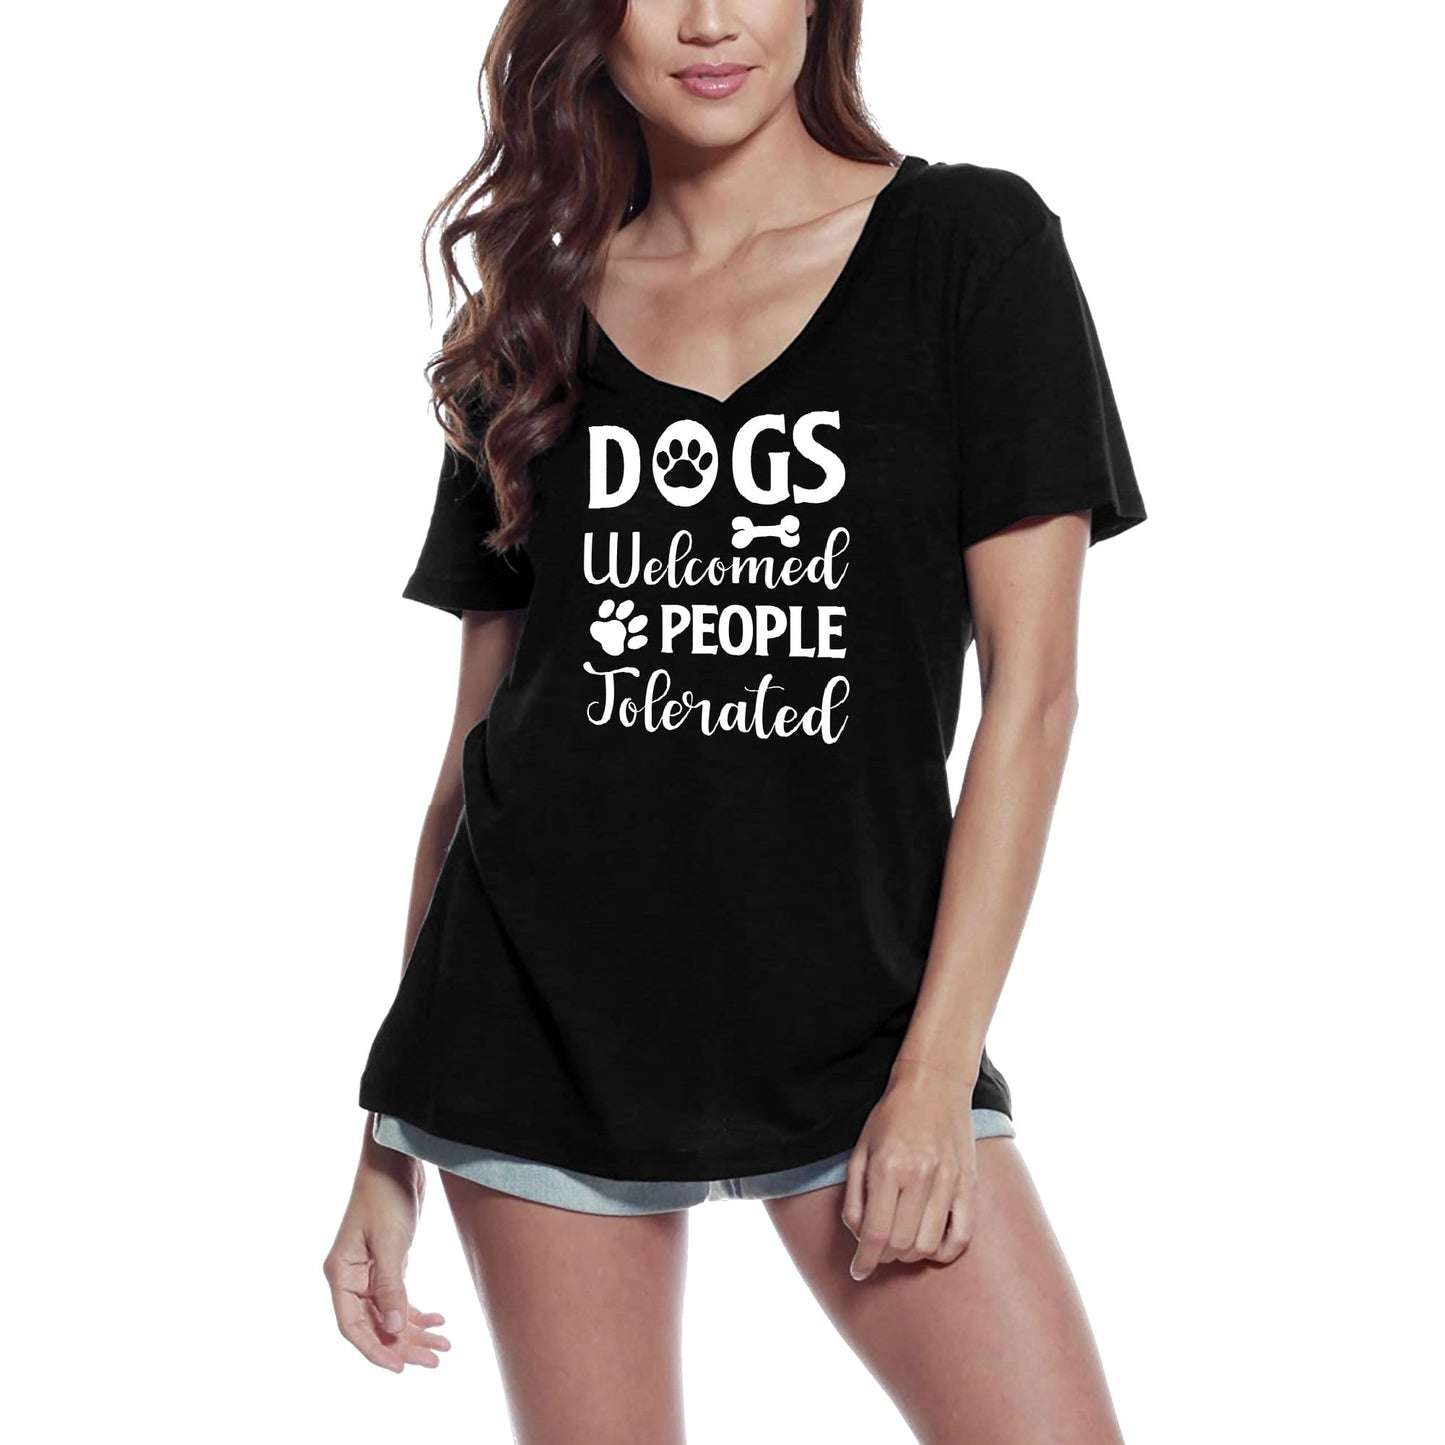 ULTRABASIC Women's T-Shirt Dogs Welcomed People Tolerated - Funny Short Sleeve Tee Shirt Tops